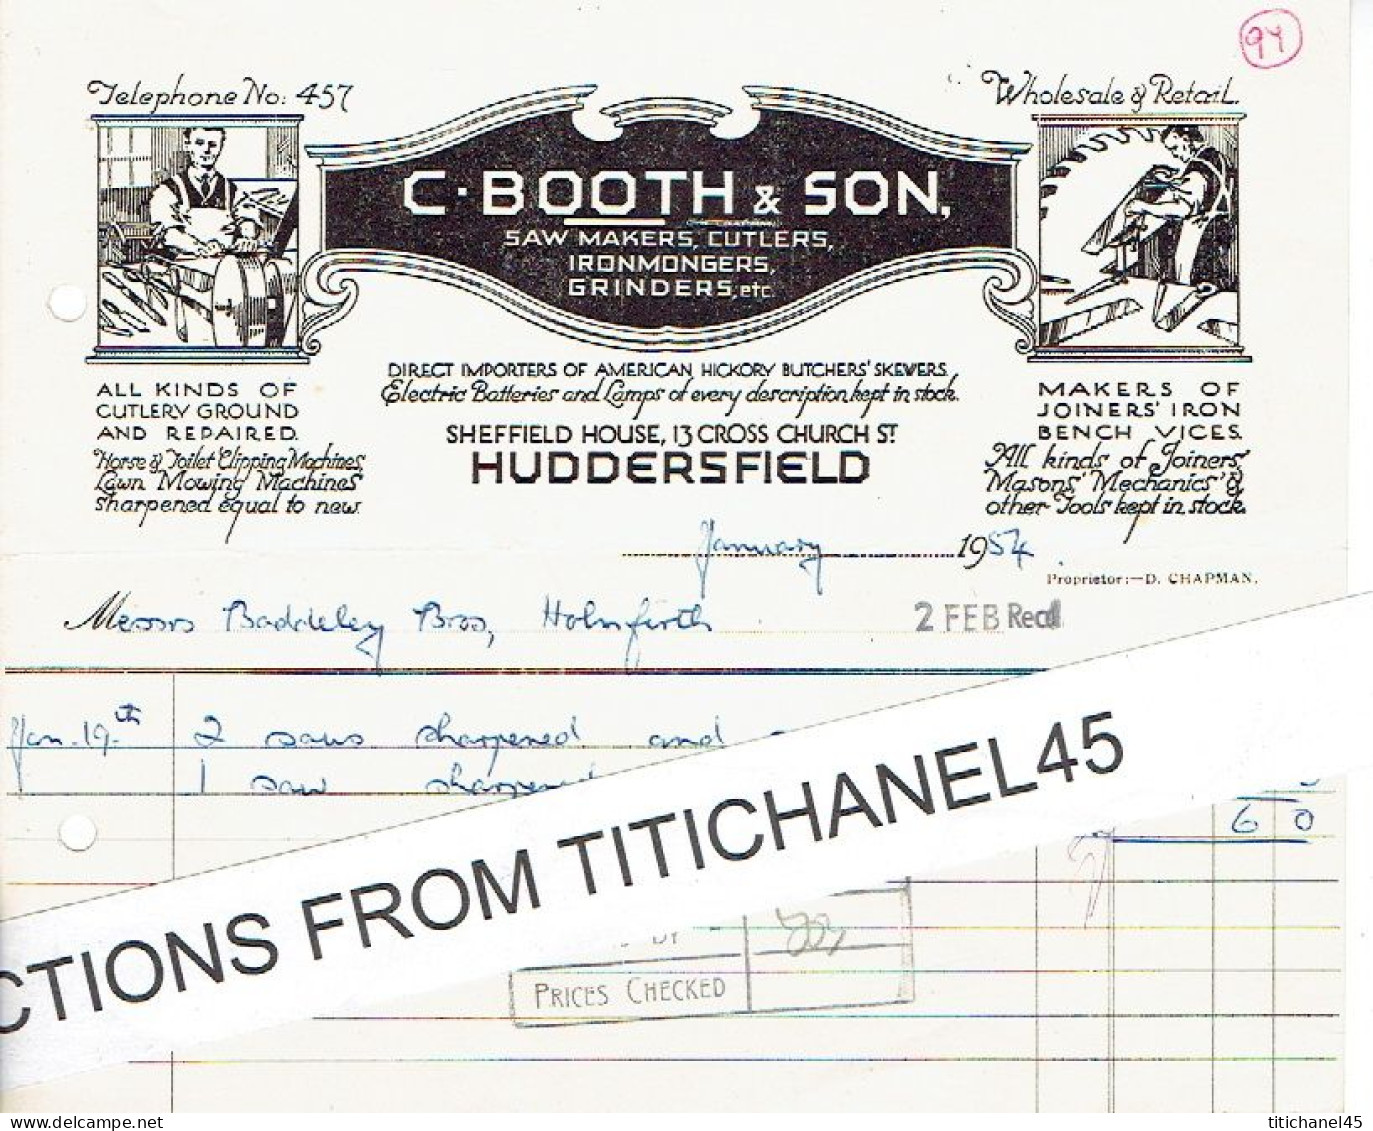 1954 HUDDERSFIELD - Invoice From C. BOOTH & SON - Saw Makers, Cutlers, Ironmongers, Grinders... - Reino Unido